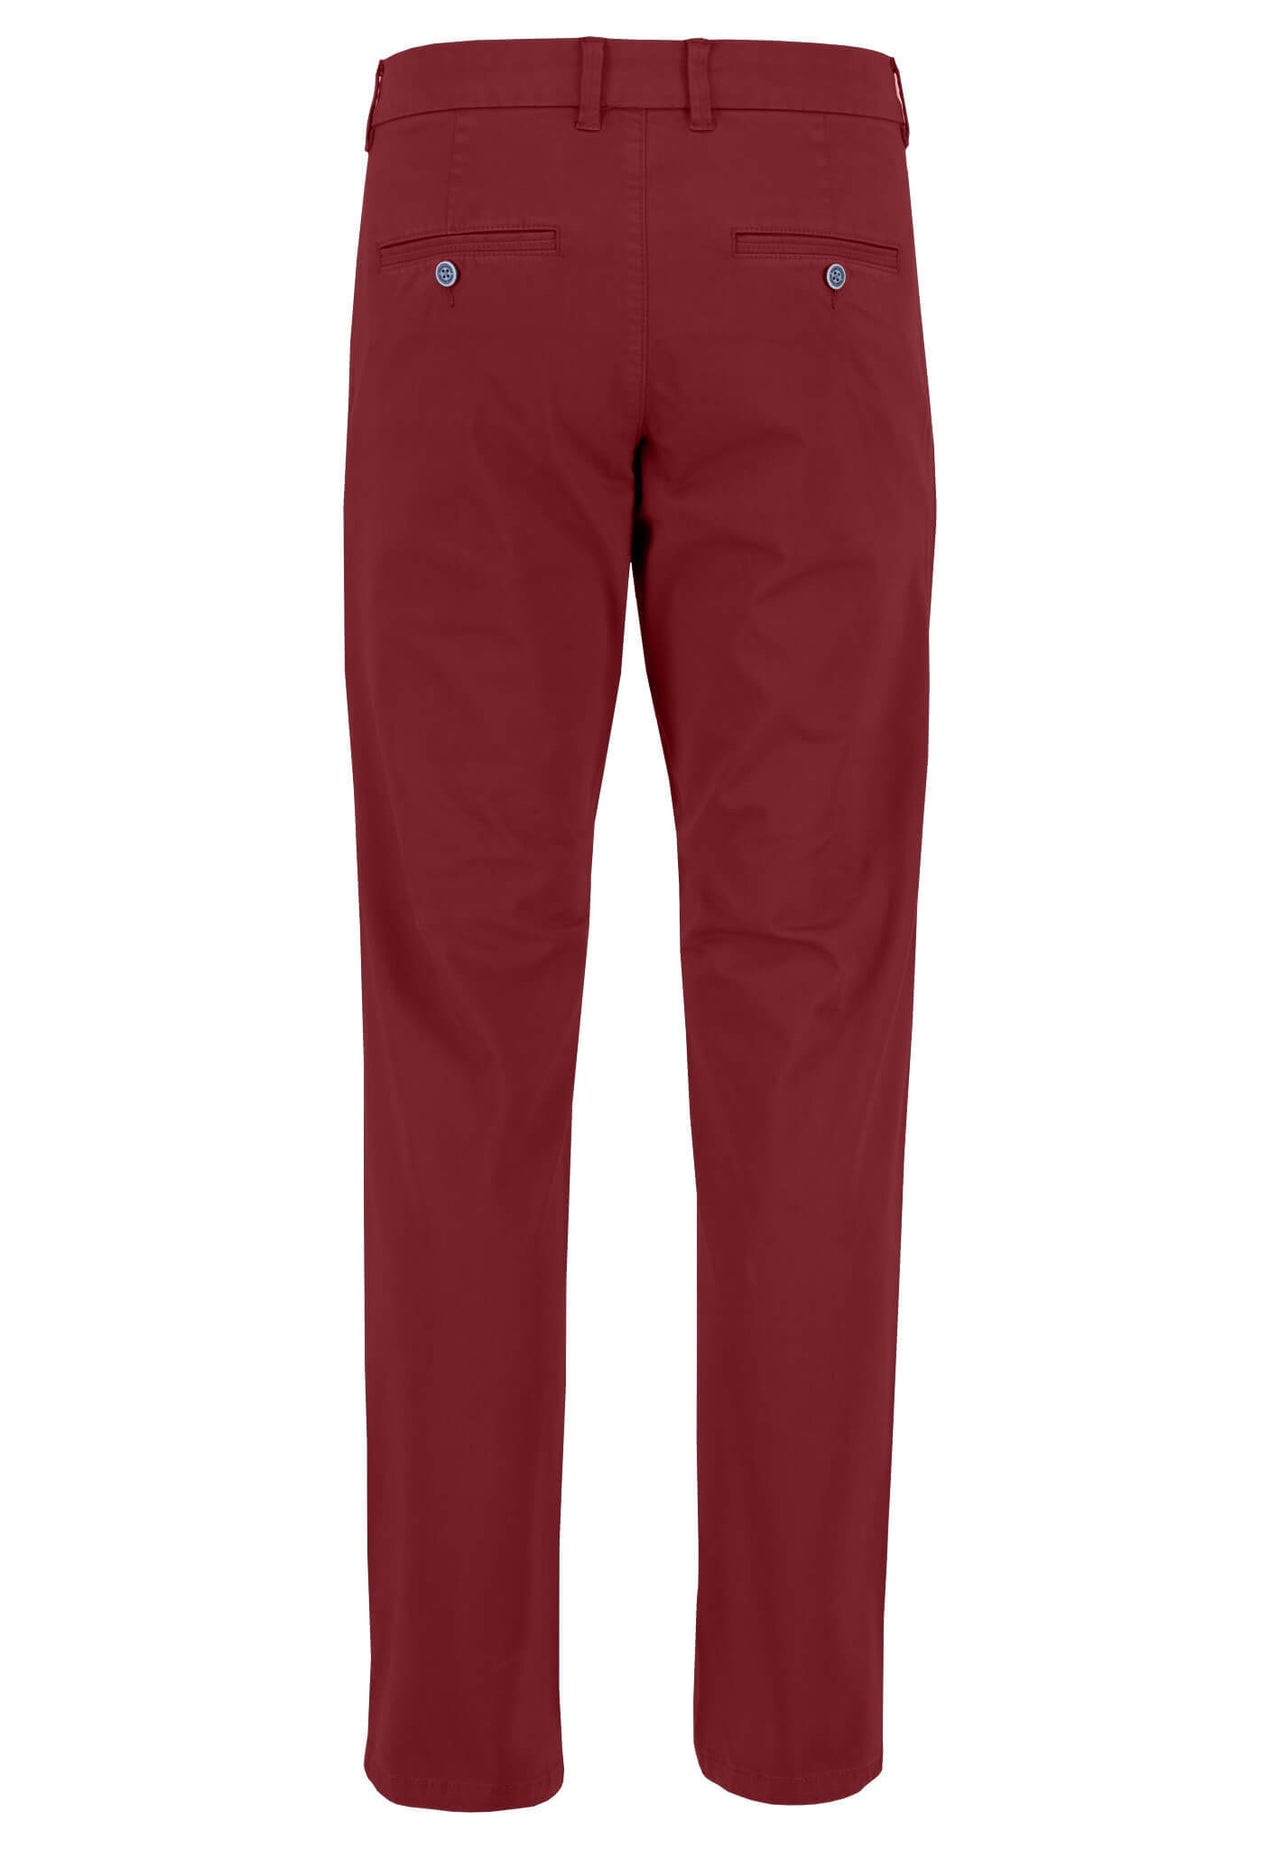 Fynch Hatton Chino Trousers